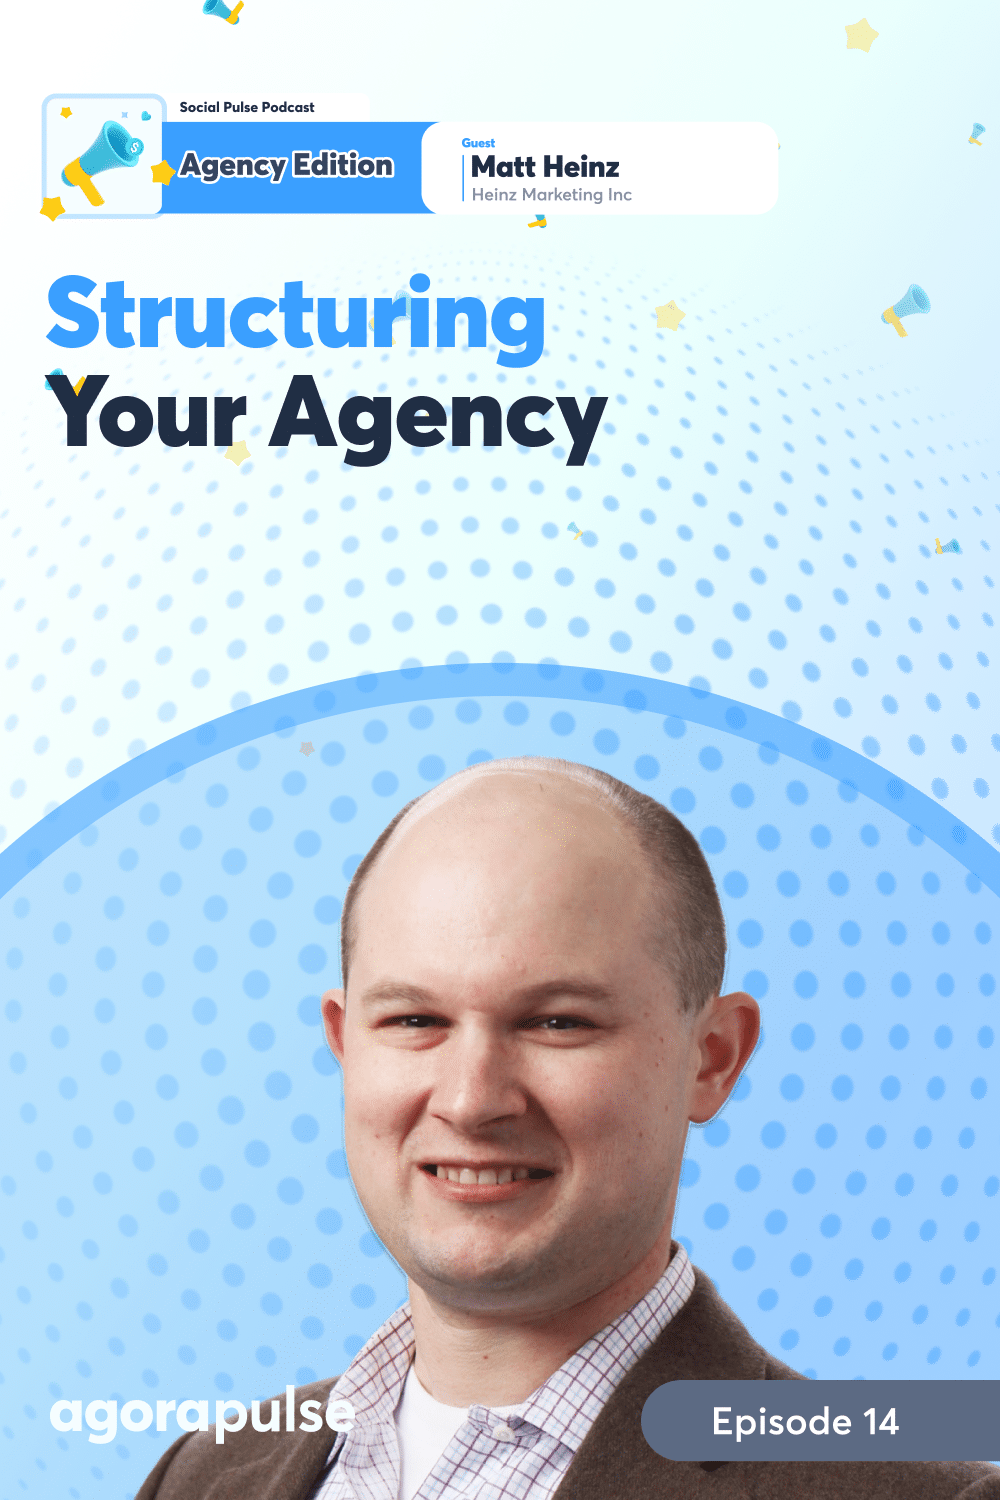 How to Structure Your Agency to Win Using EOS